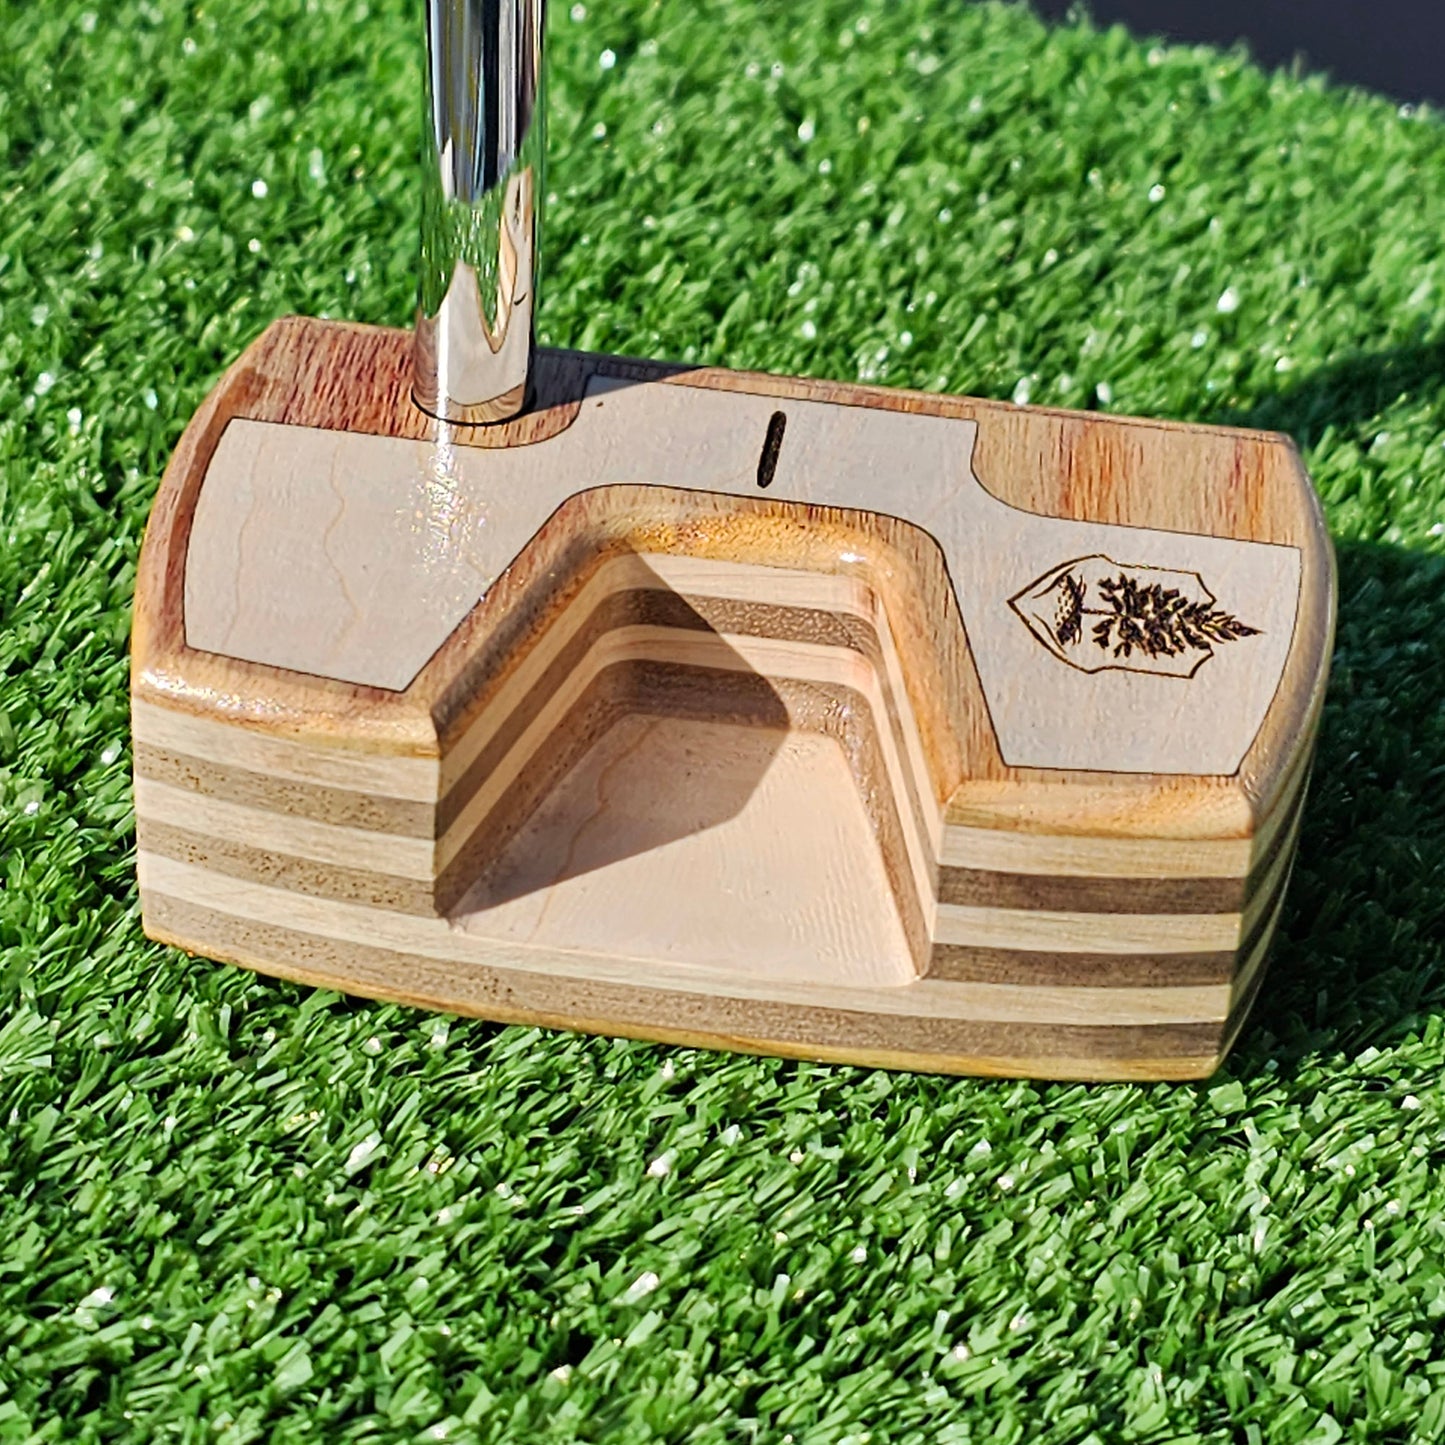 Canarywood with Walnut and Maple body Woodrich Regal wood putter